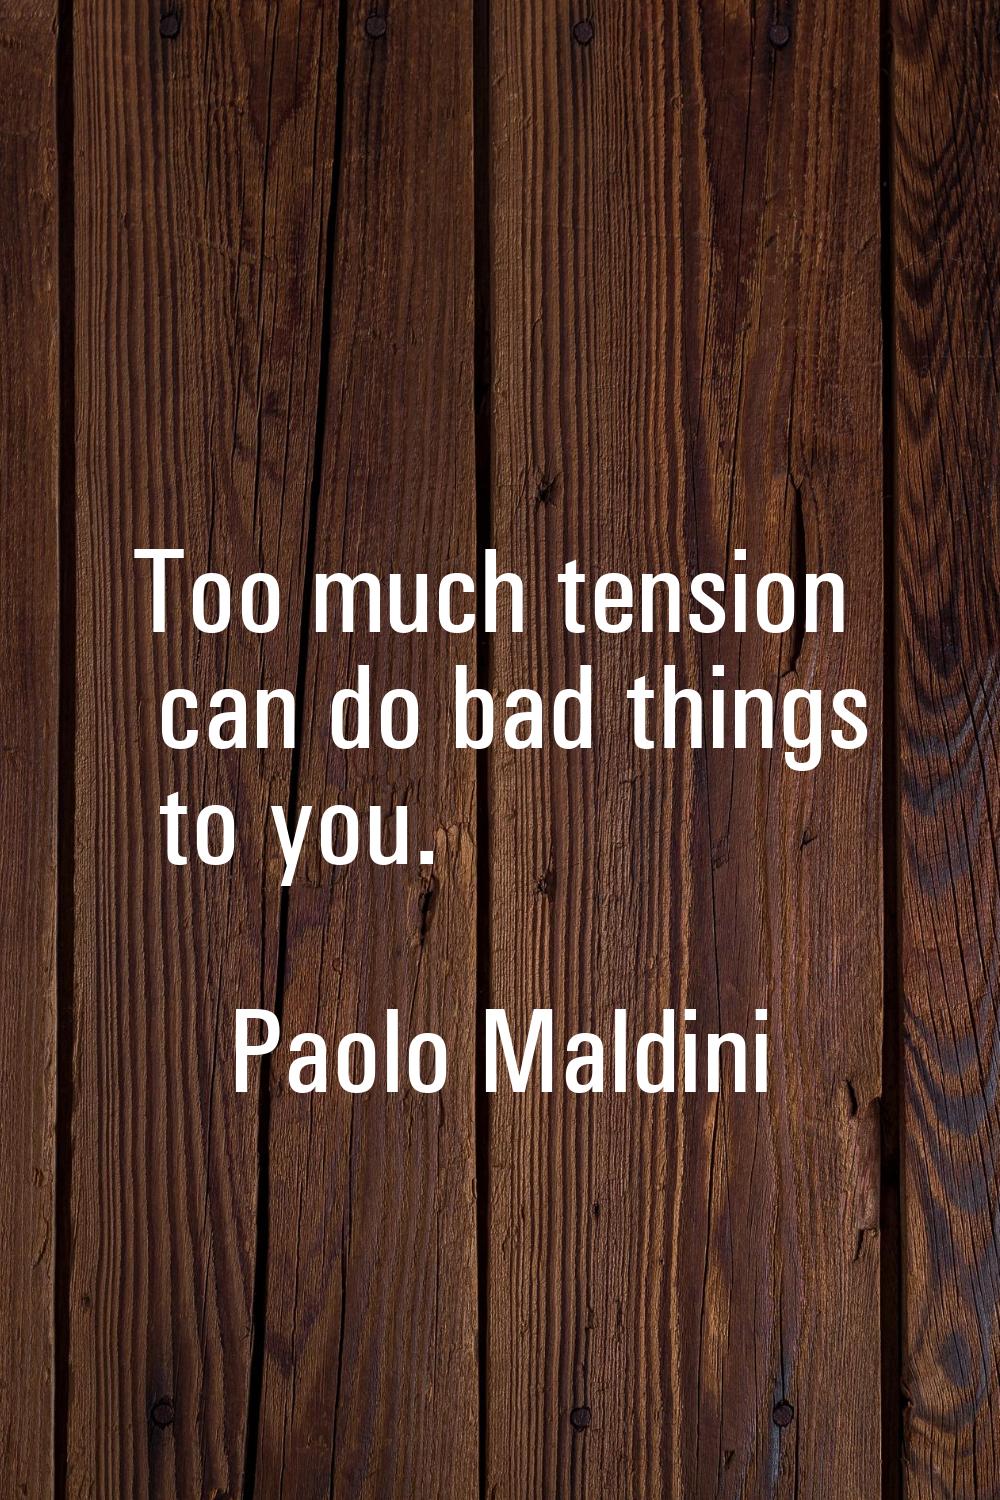 Too much tension can do bad things to you.